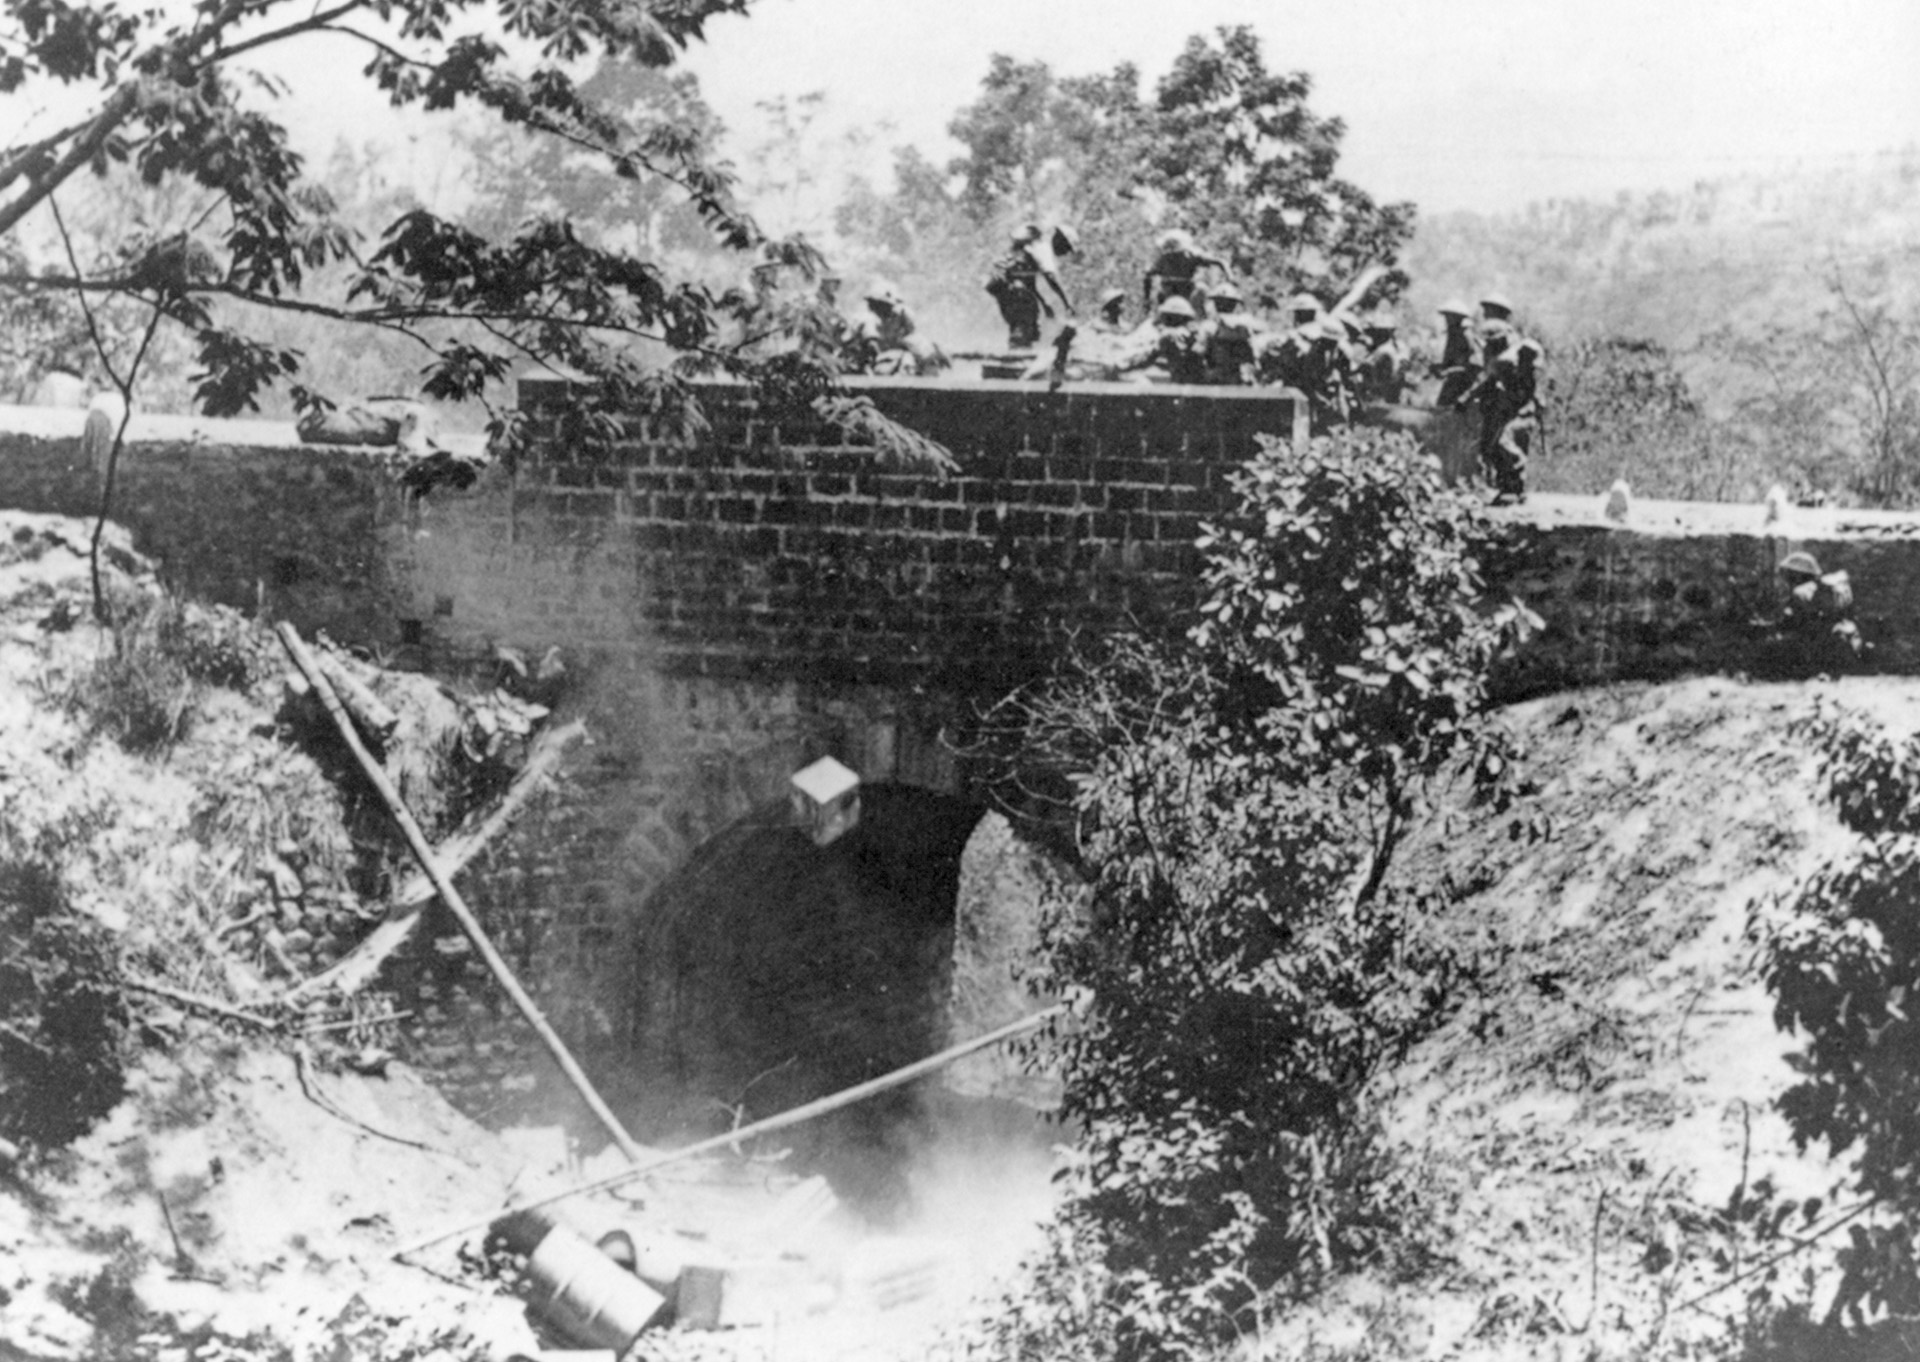 Sappers clear obstructions from a barricaded bridge. The Japanese moved through back country to descend on roads and set up their blockades.